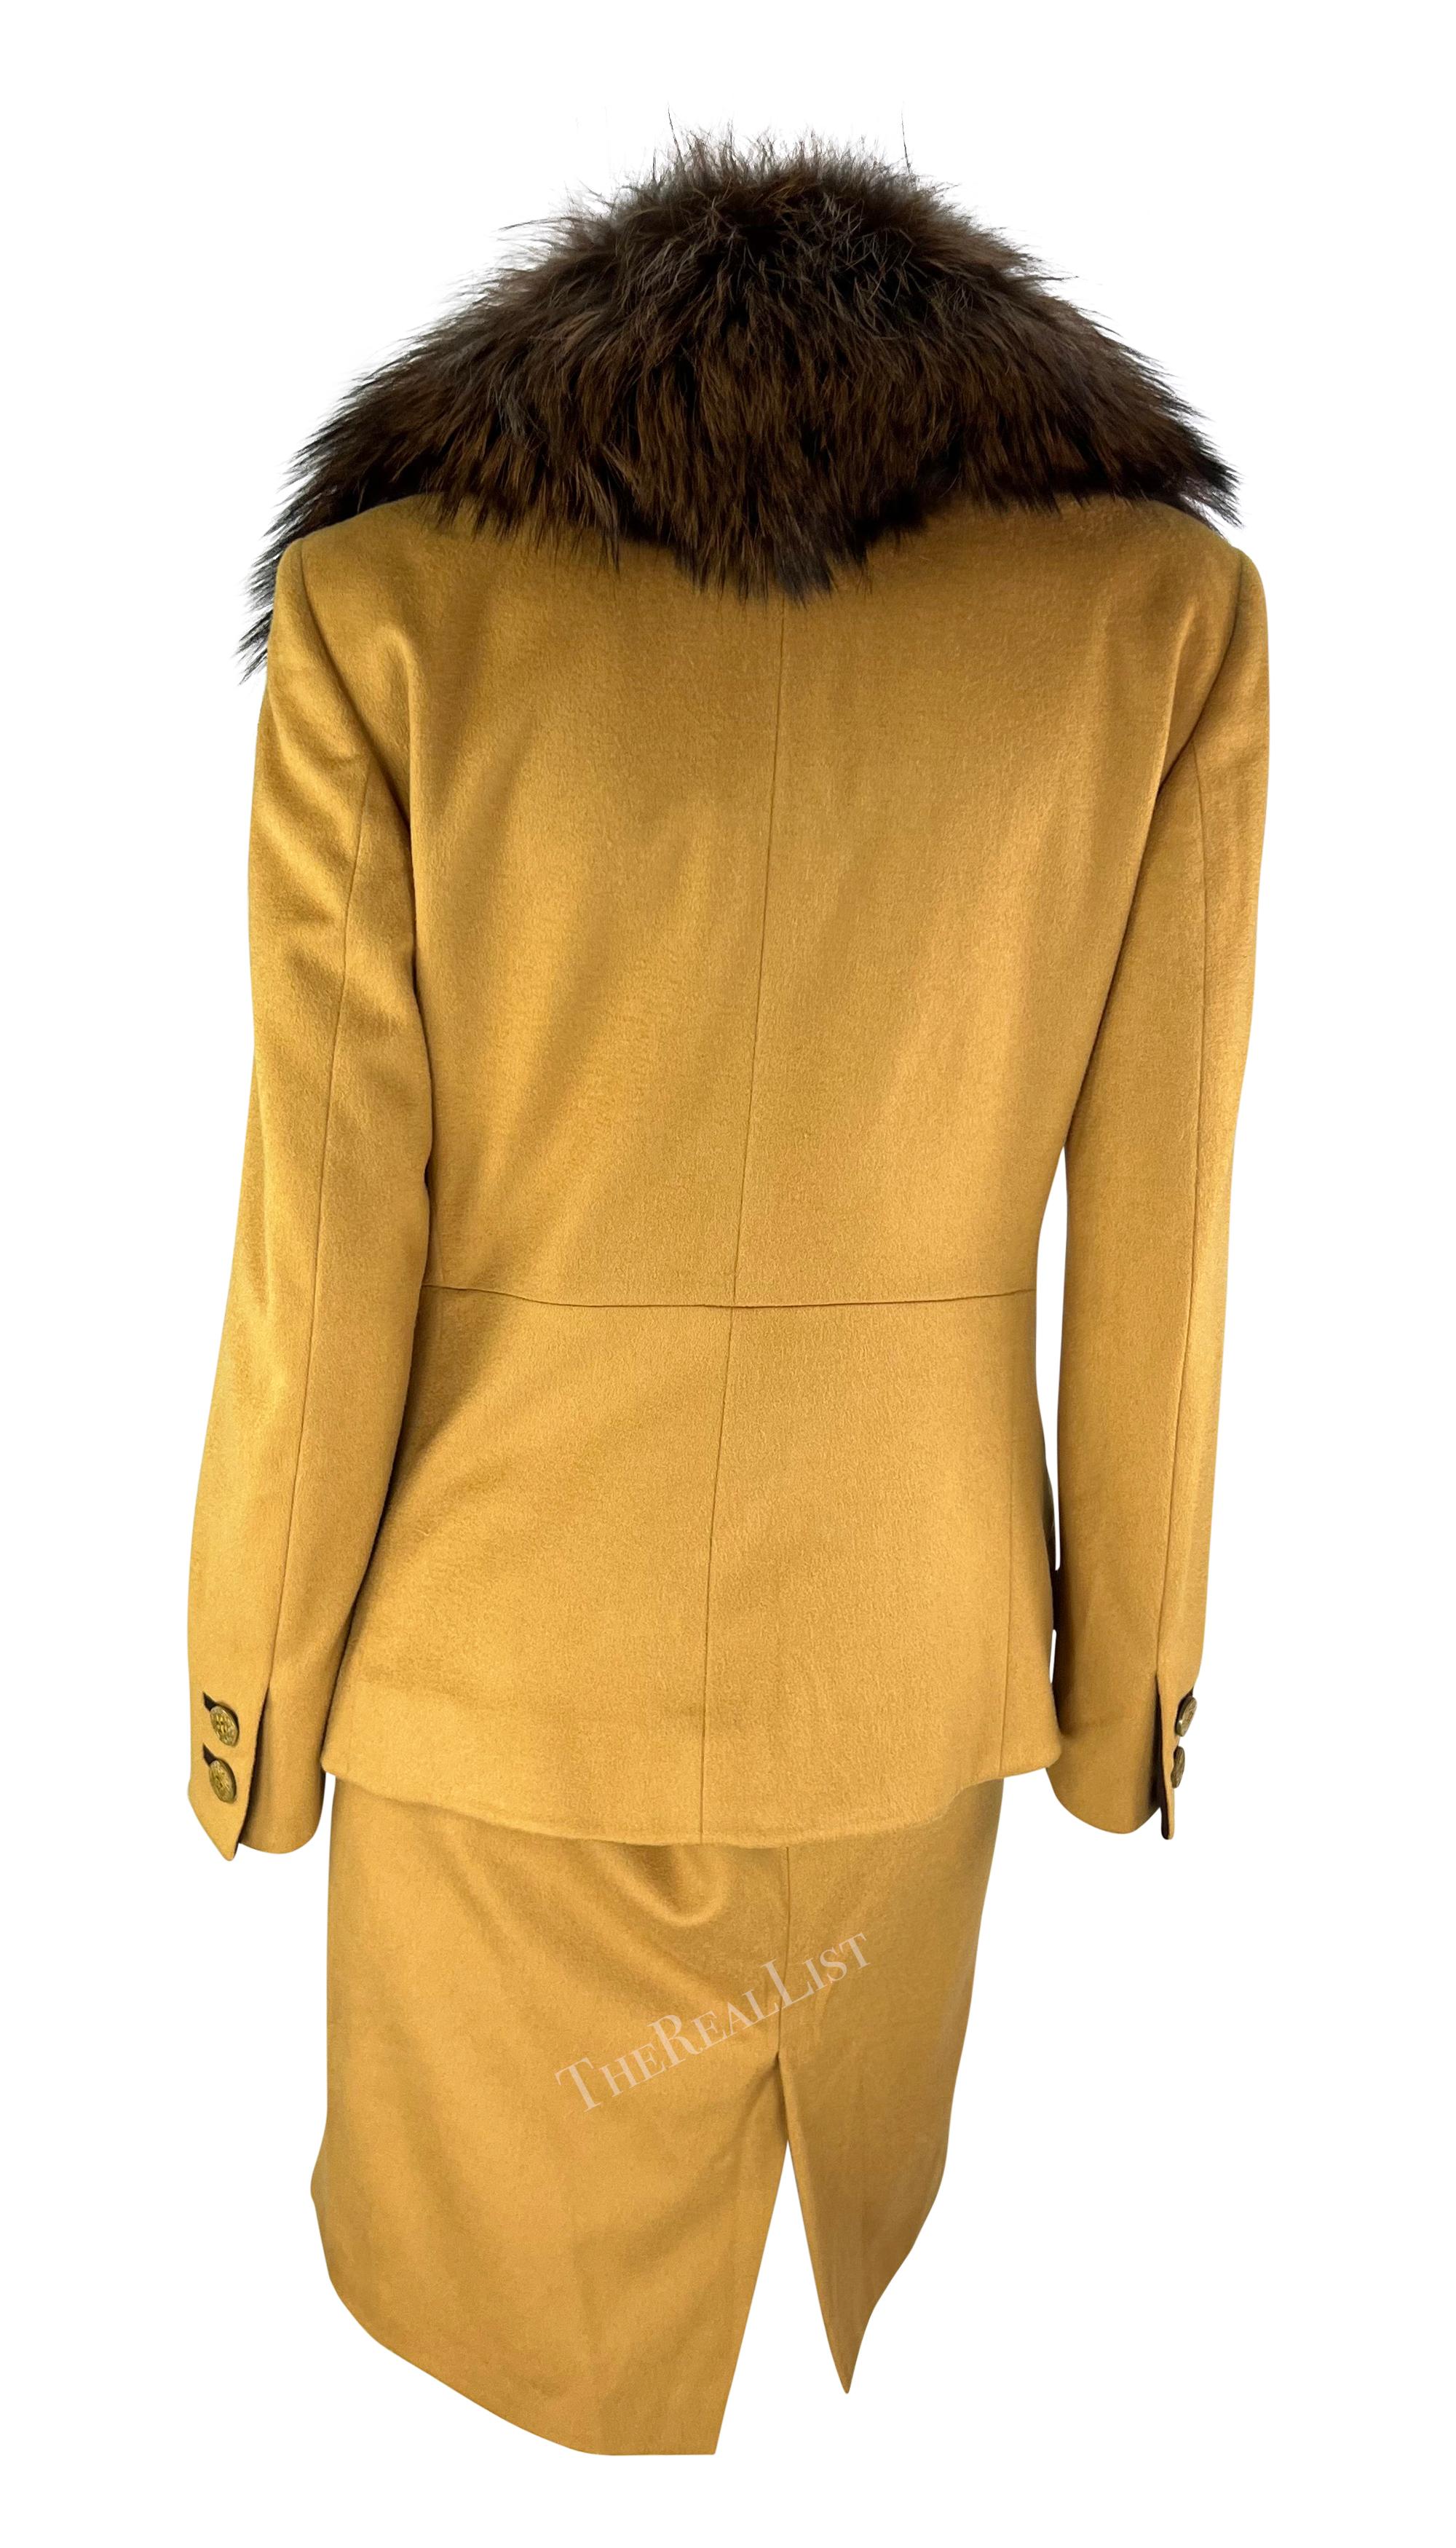 Women's F/W 1997 Gianni Versace Couture Mustard Fox Fur Trim Wool Skirt Suit For Sale